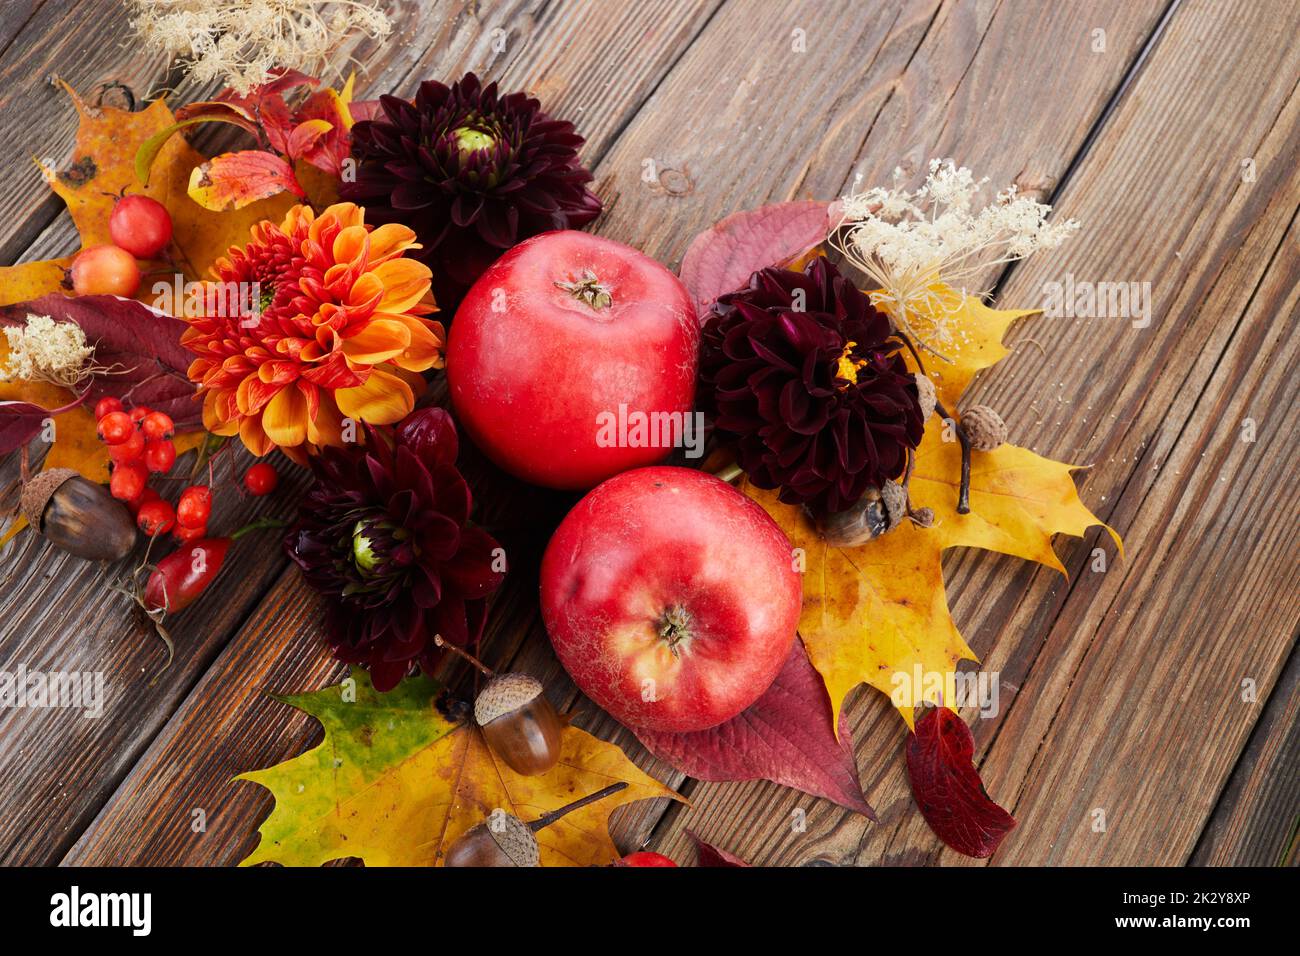 Composition of colorful fruits, berries, cones. Top view on wooden background. Autumn flat lay. Stock Photo